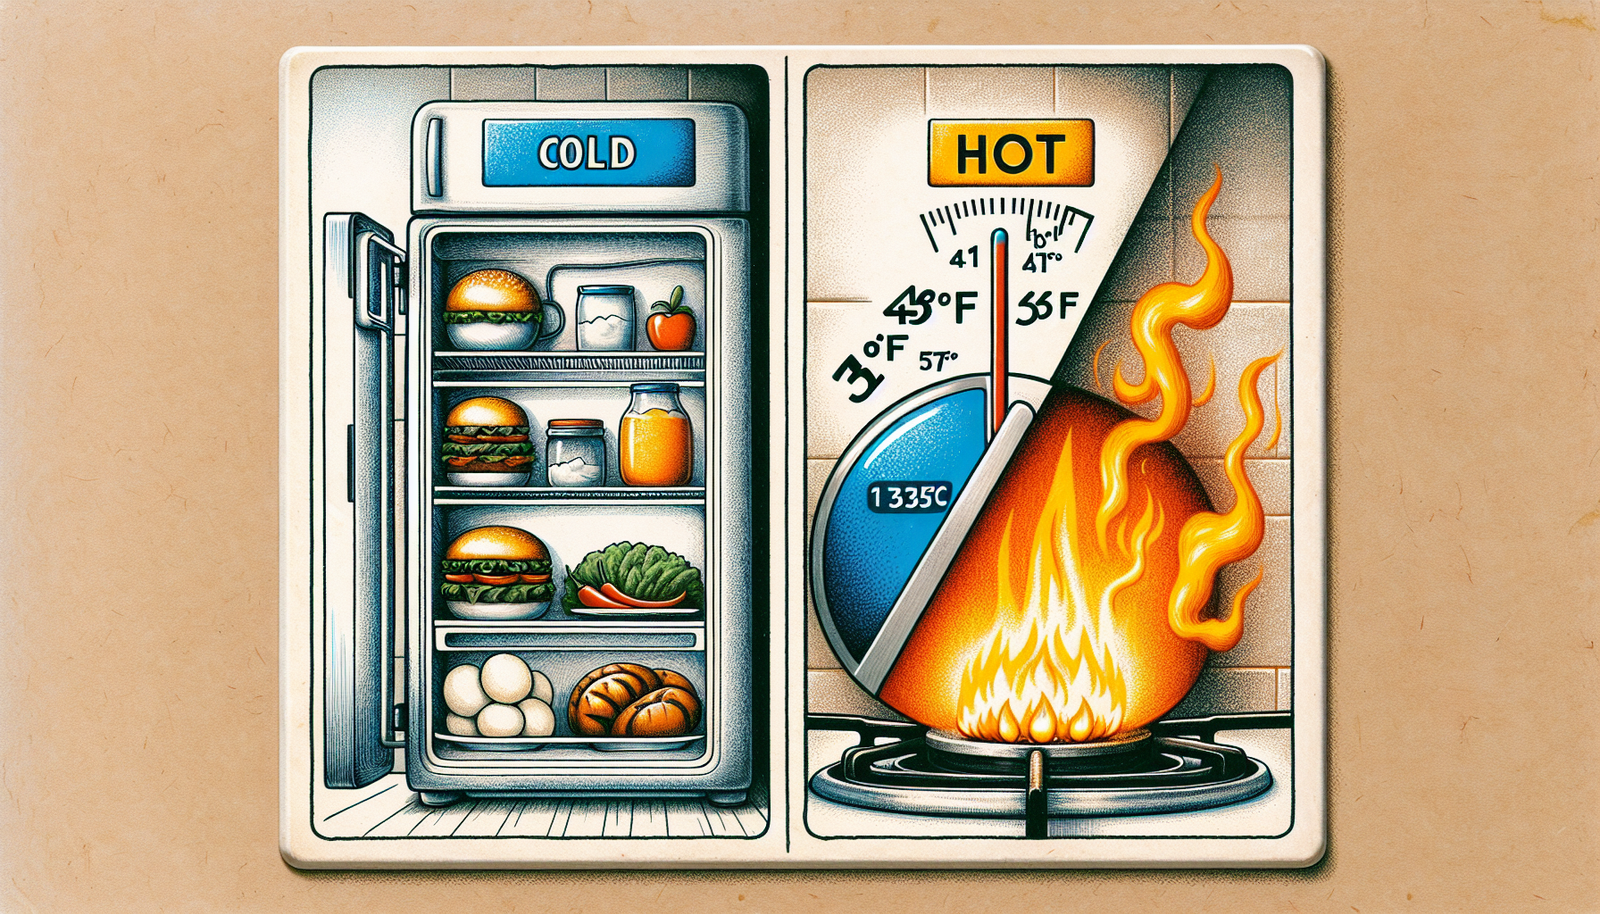 What Is The Temperature Danger Zone According To The FDA Food Code?